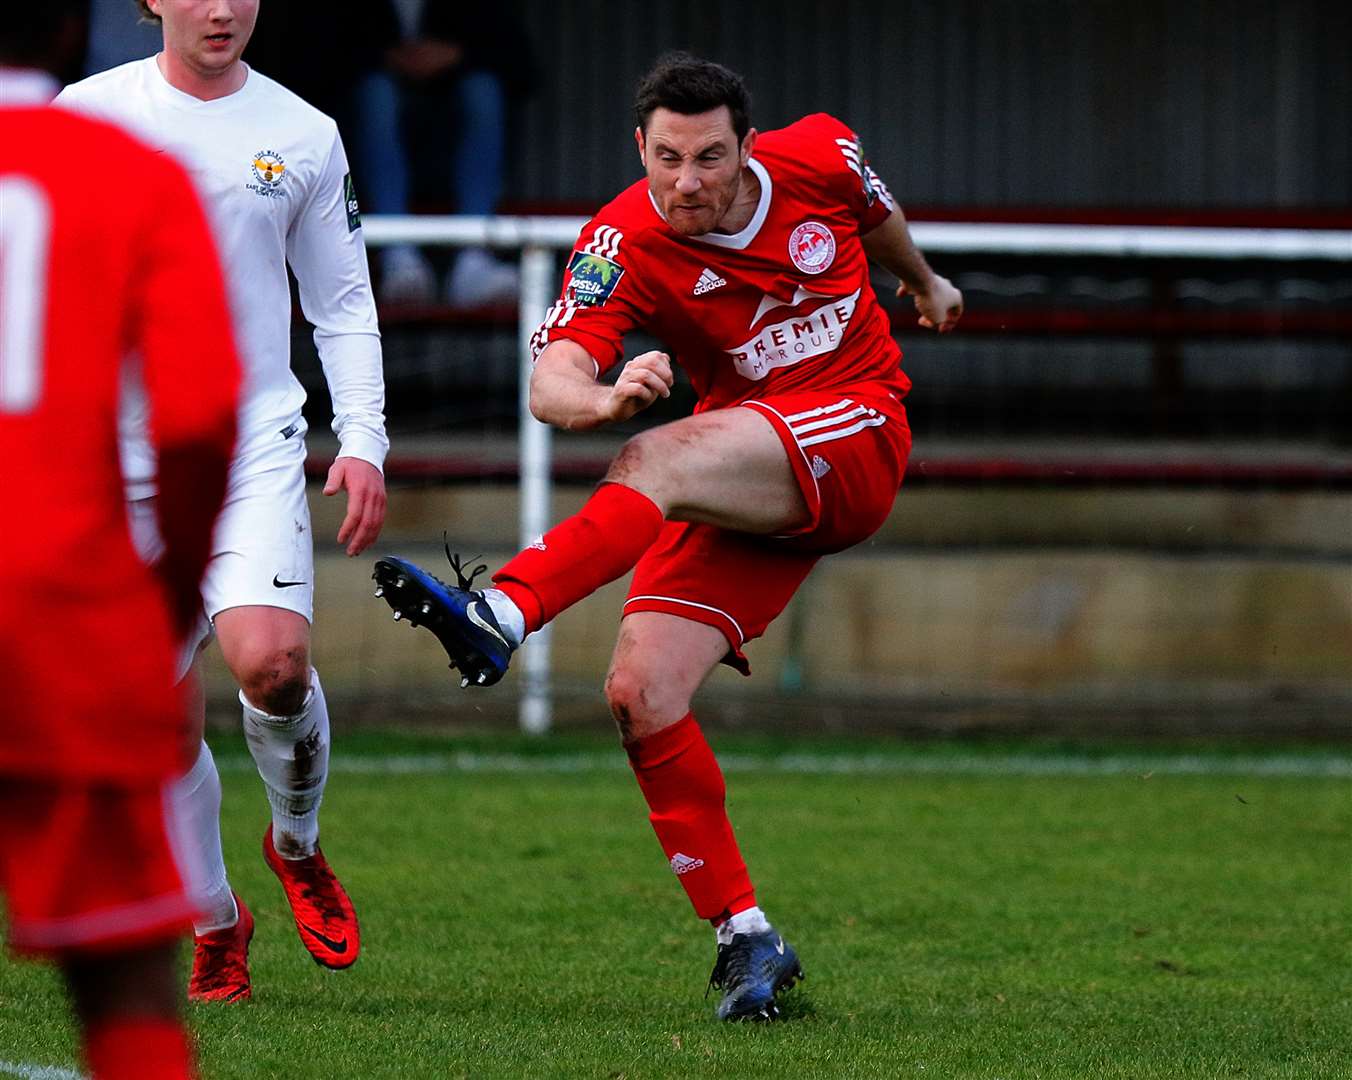 Hythe's Chris Kinnear takes a shot with his left foot Picture: Andy Jones